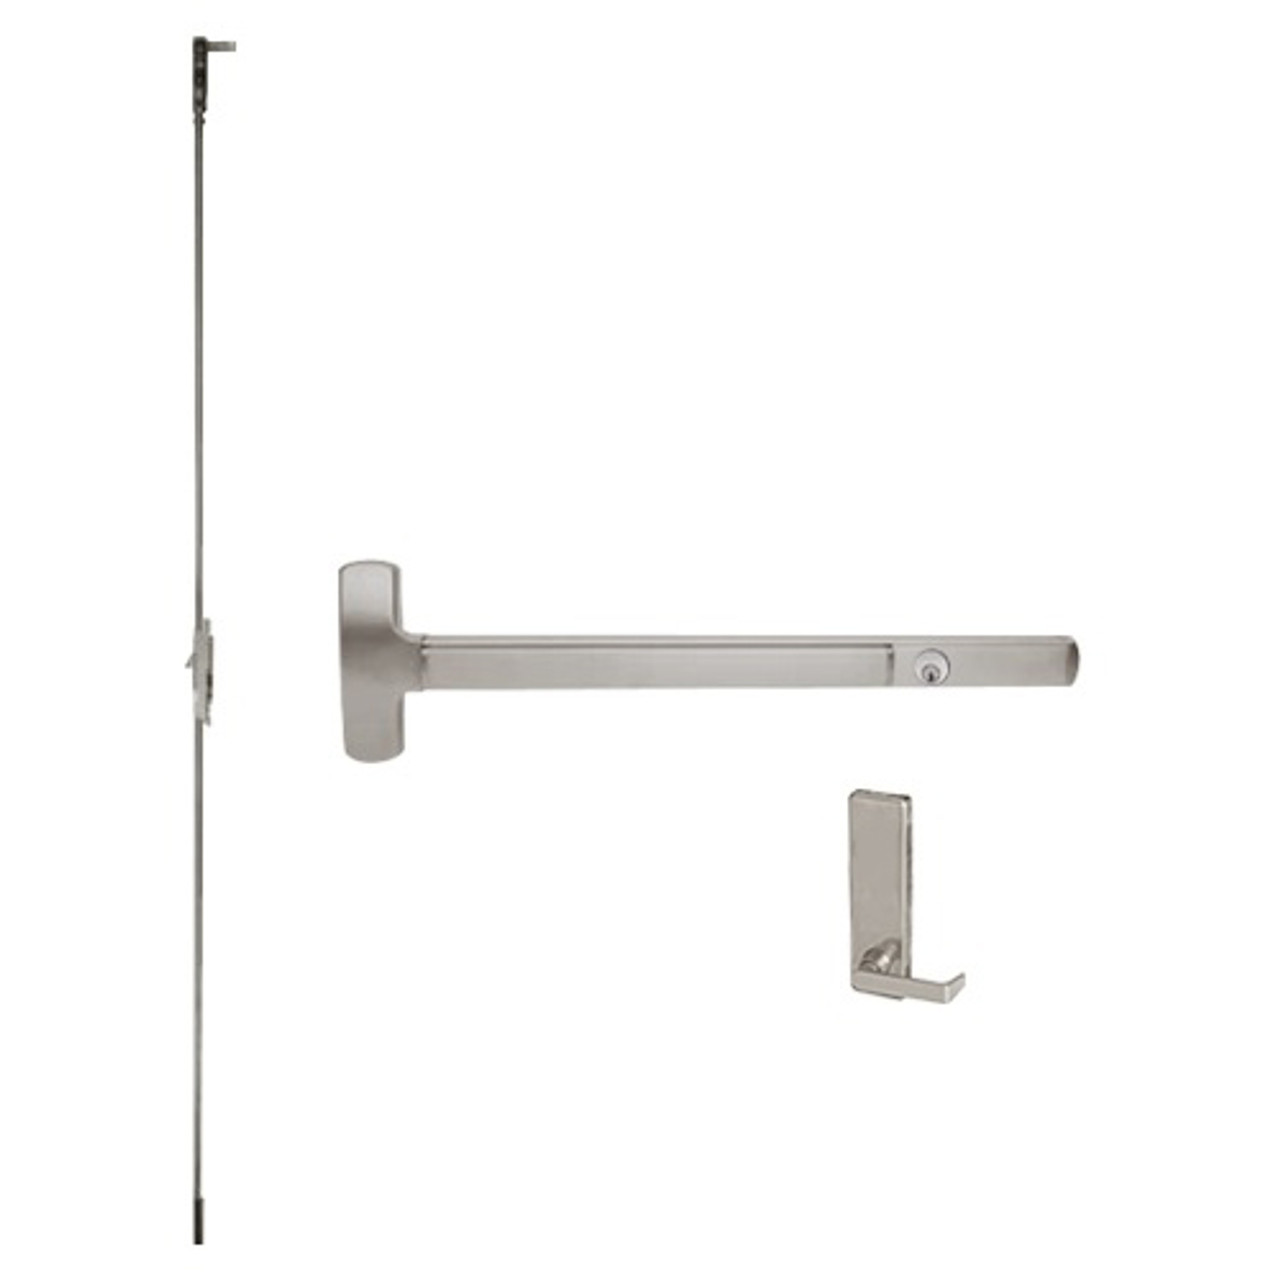 CD25-C-L-BE-DANE-US32D-4-LHR Falcon Exit Device in Satin Stainless Steel